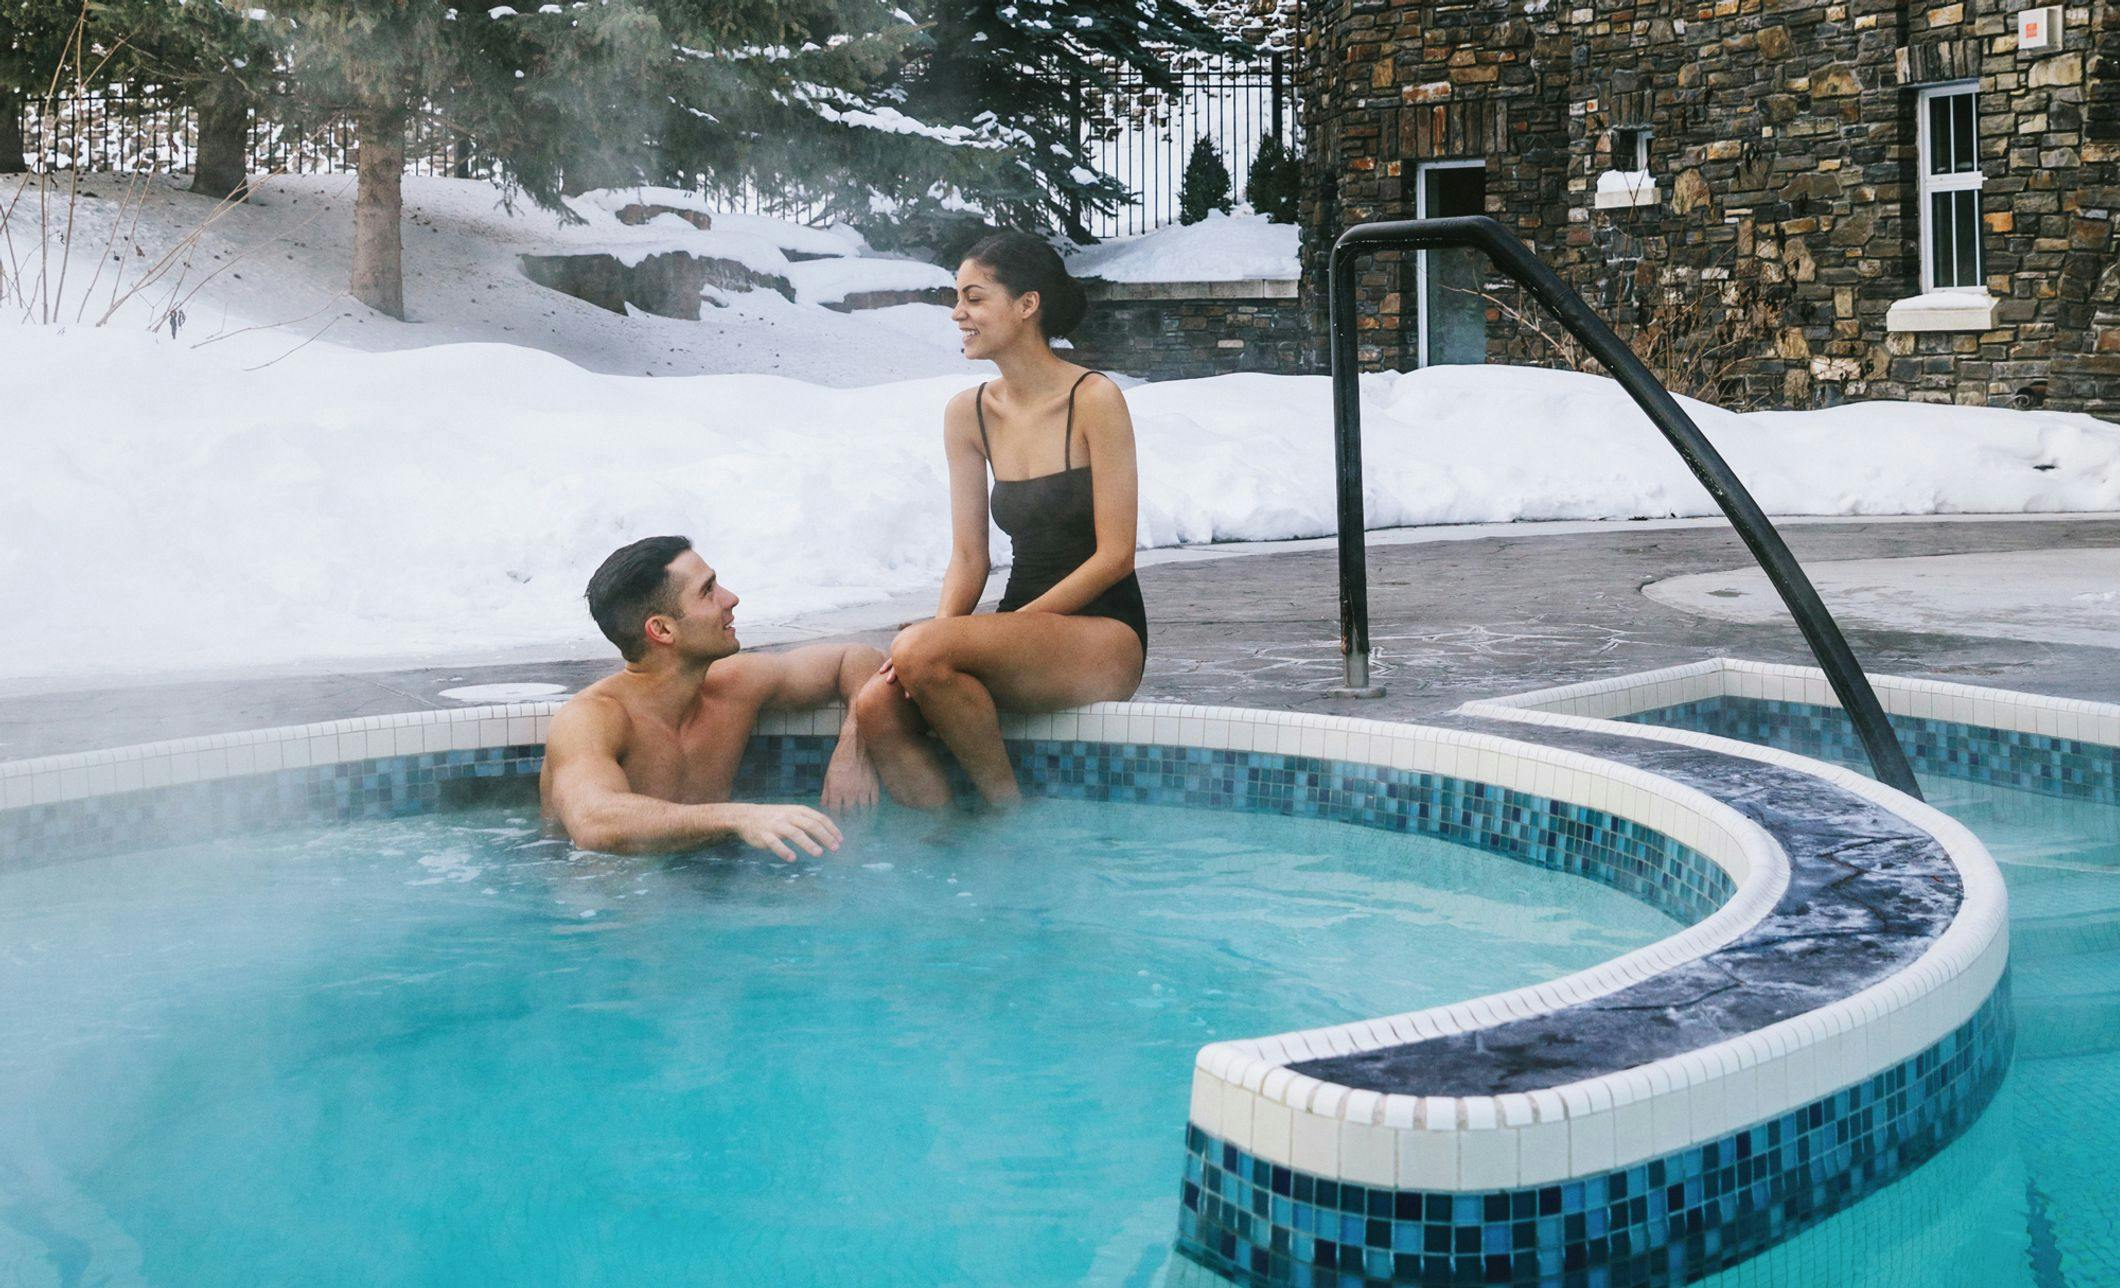 A couple soaking in an outdoor hot tub with a snowy background behind them and steam rising in front of them